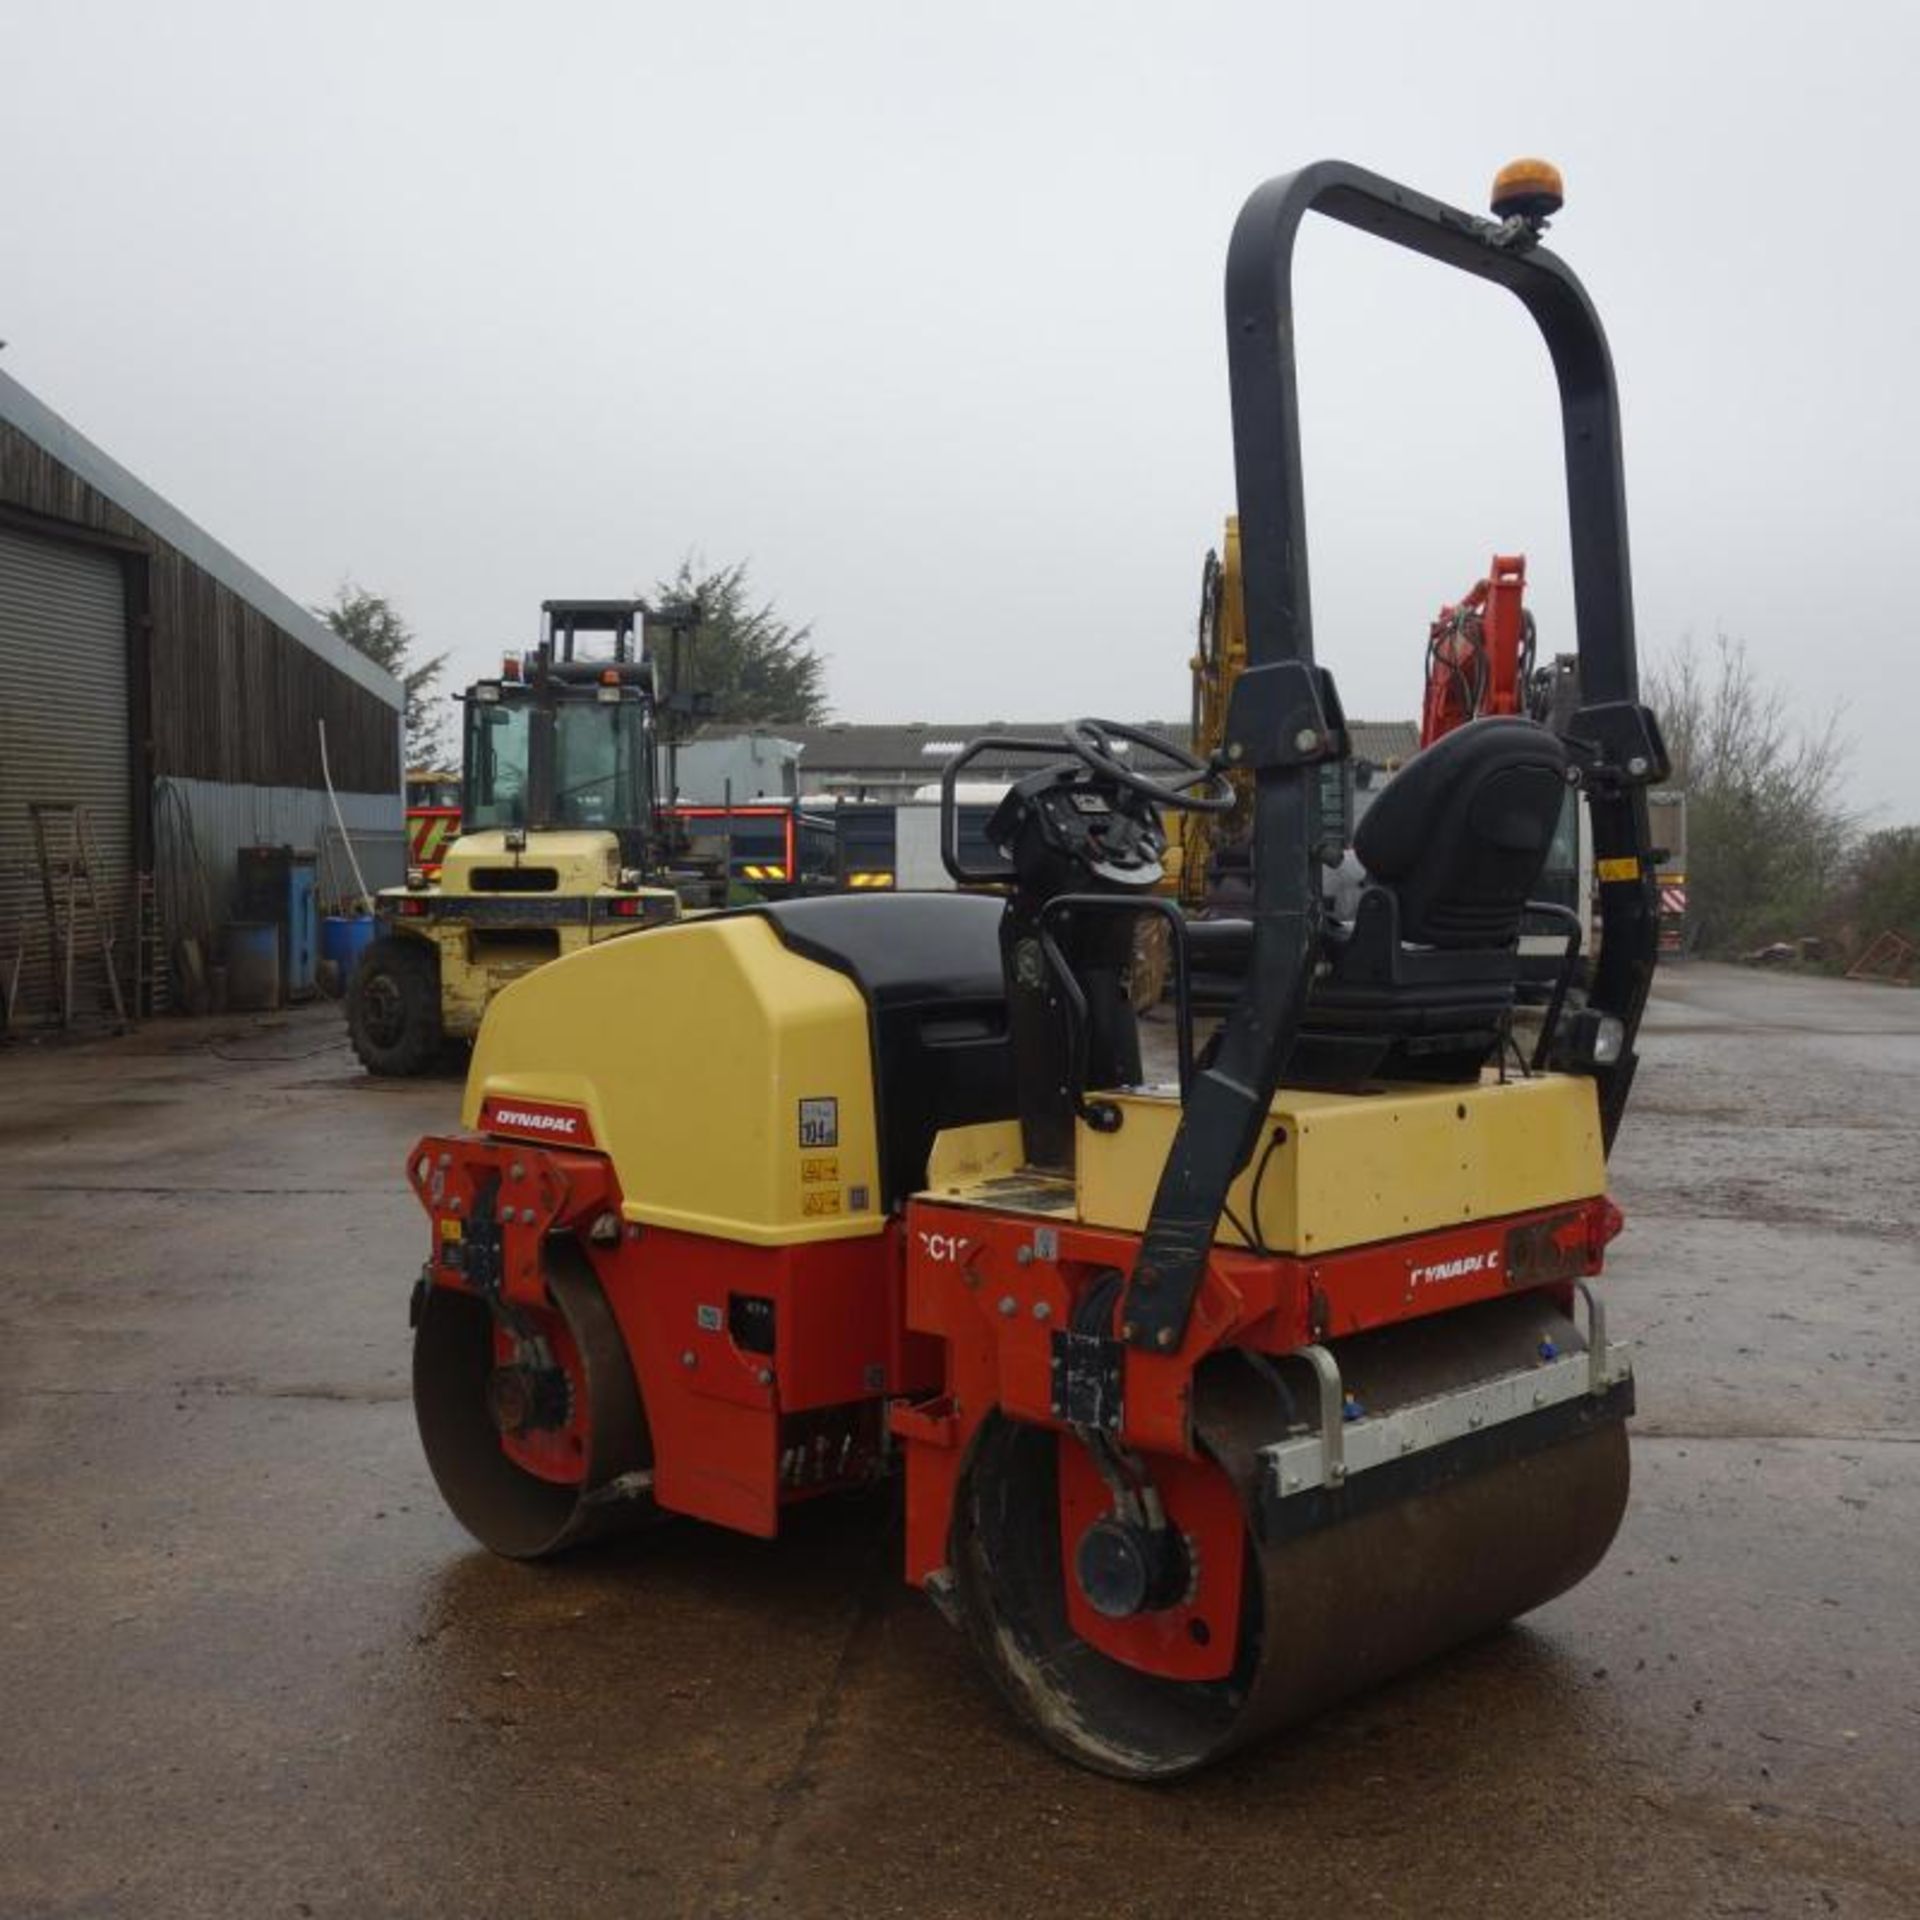 2012 Dynapac Cc1200 Roller, Only 479 Hours From New - Image 4 of 10